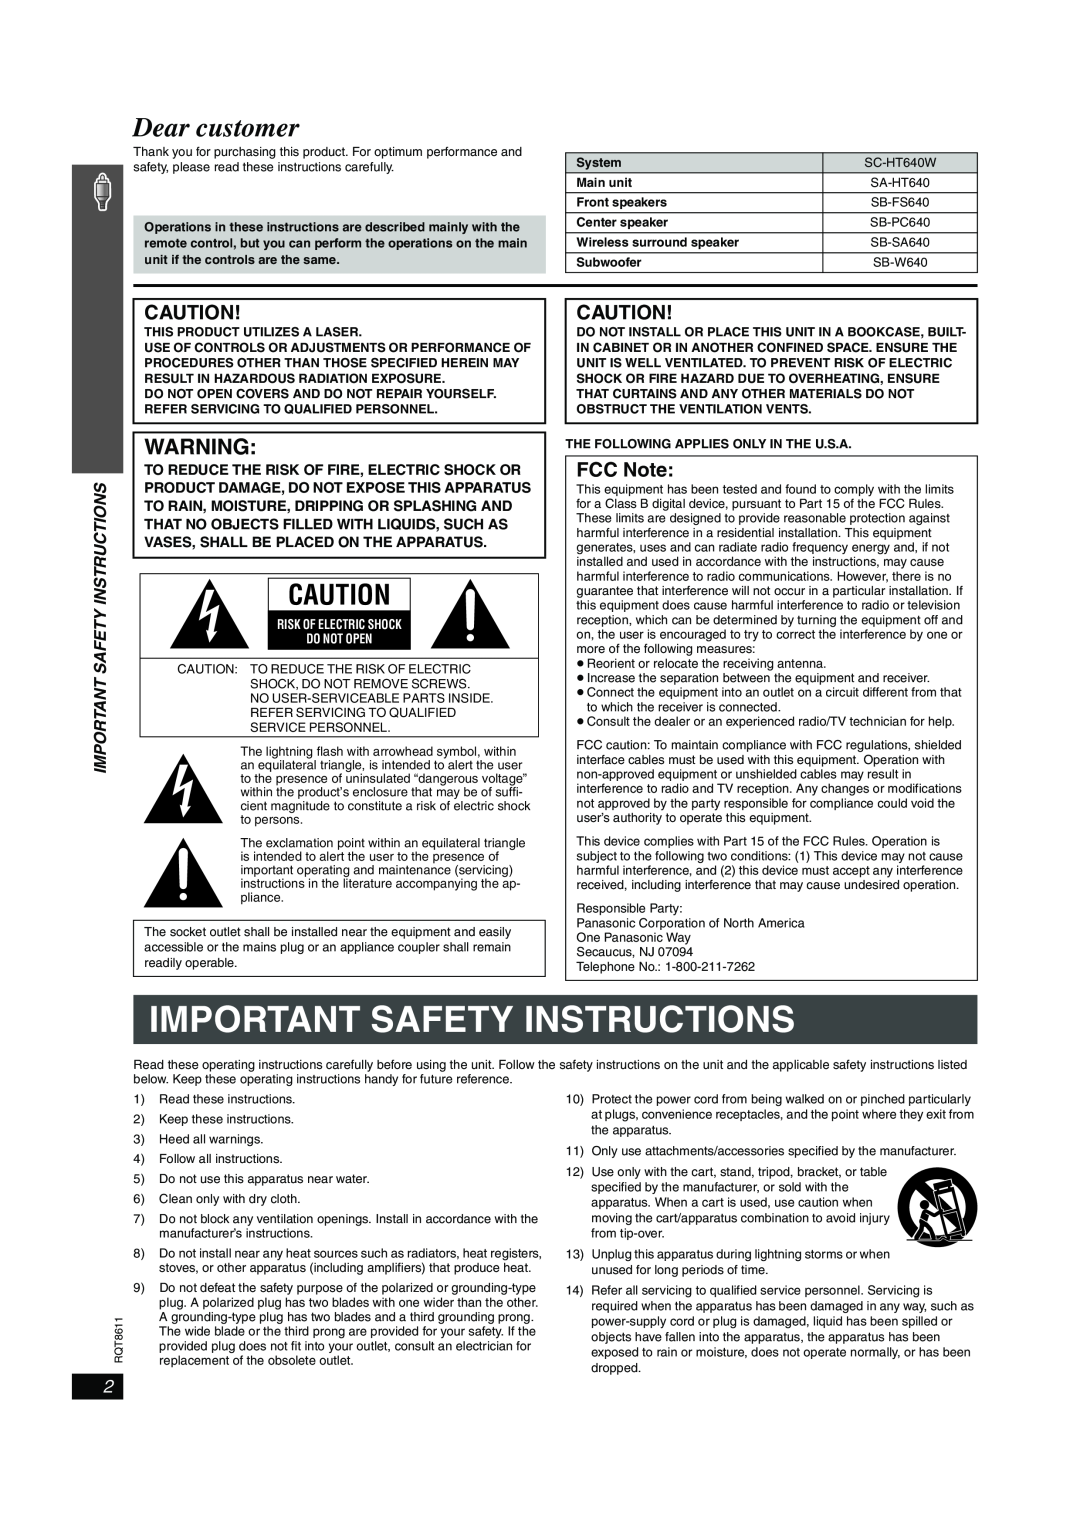 Panasonic SC-HT640W manual FCC Note, HT640W.bookPage2Friday,January20,20066 19PM, Important Safety Instructions 